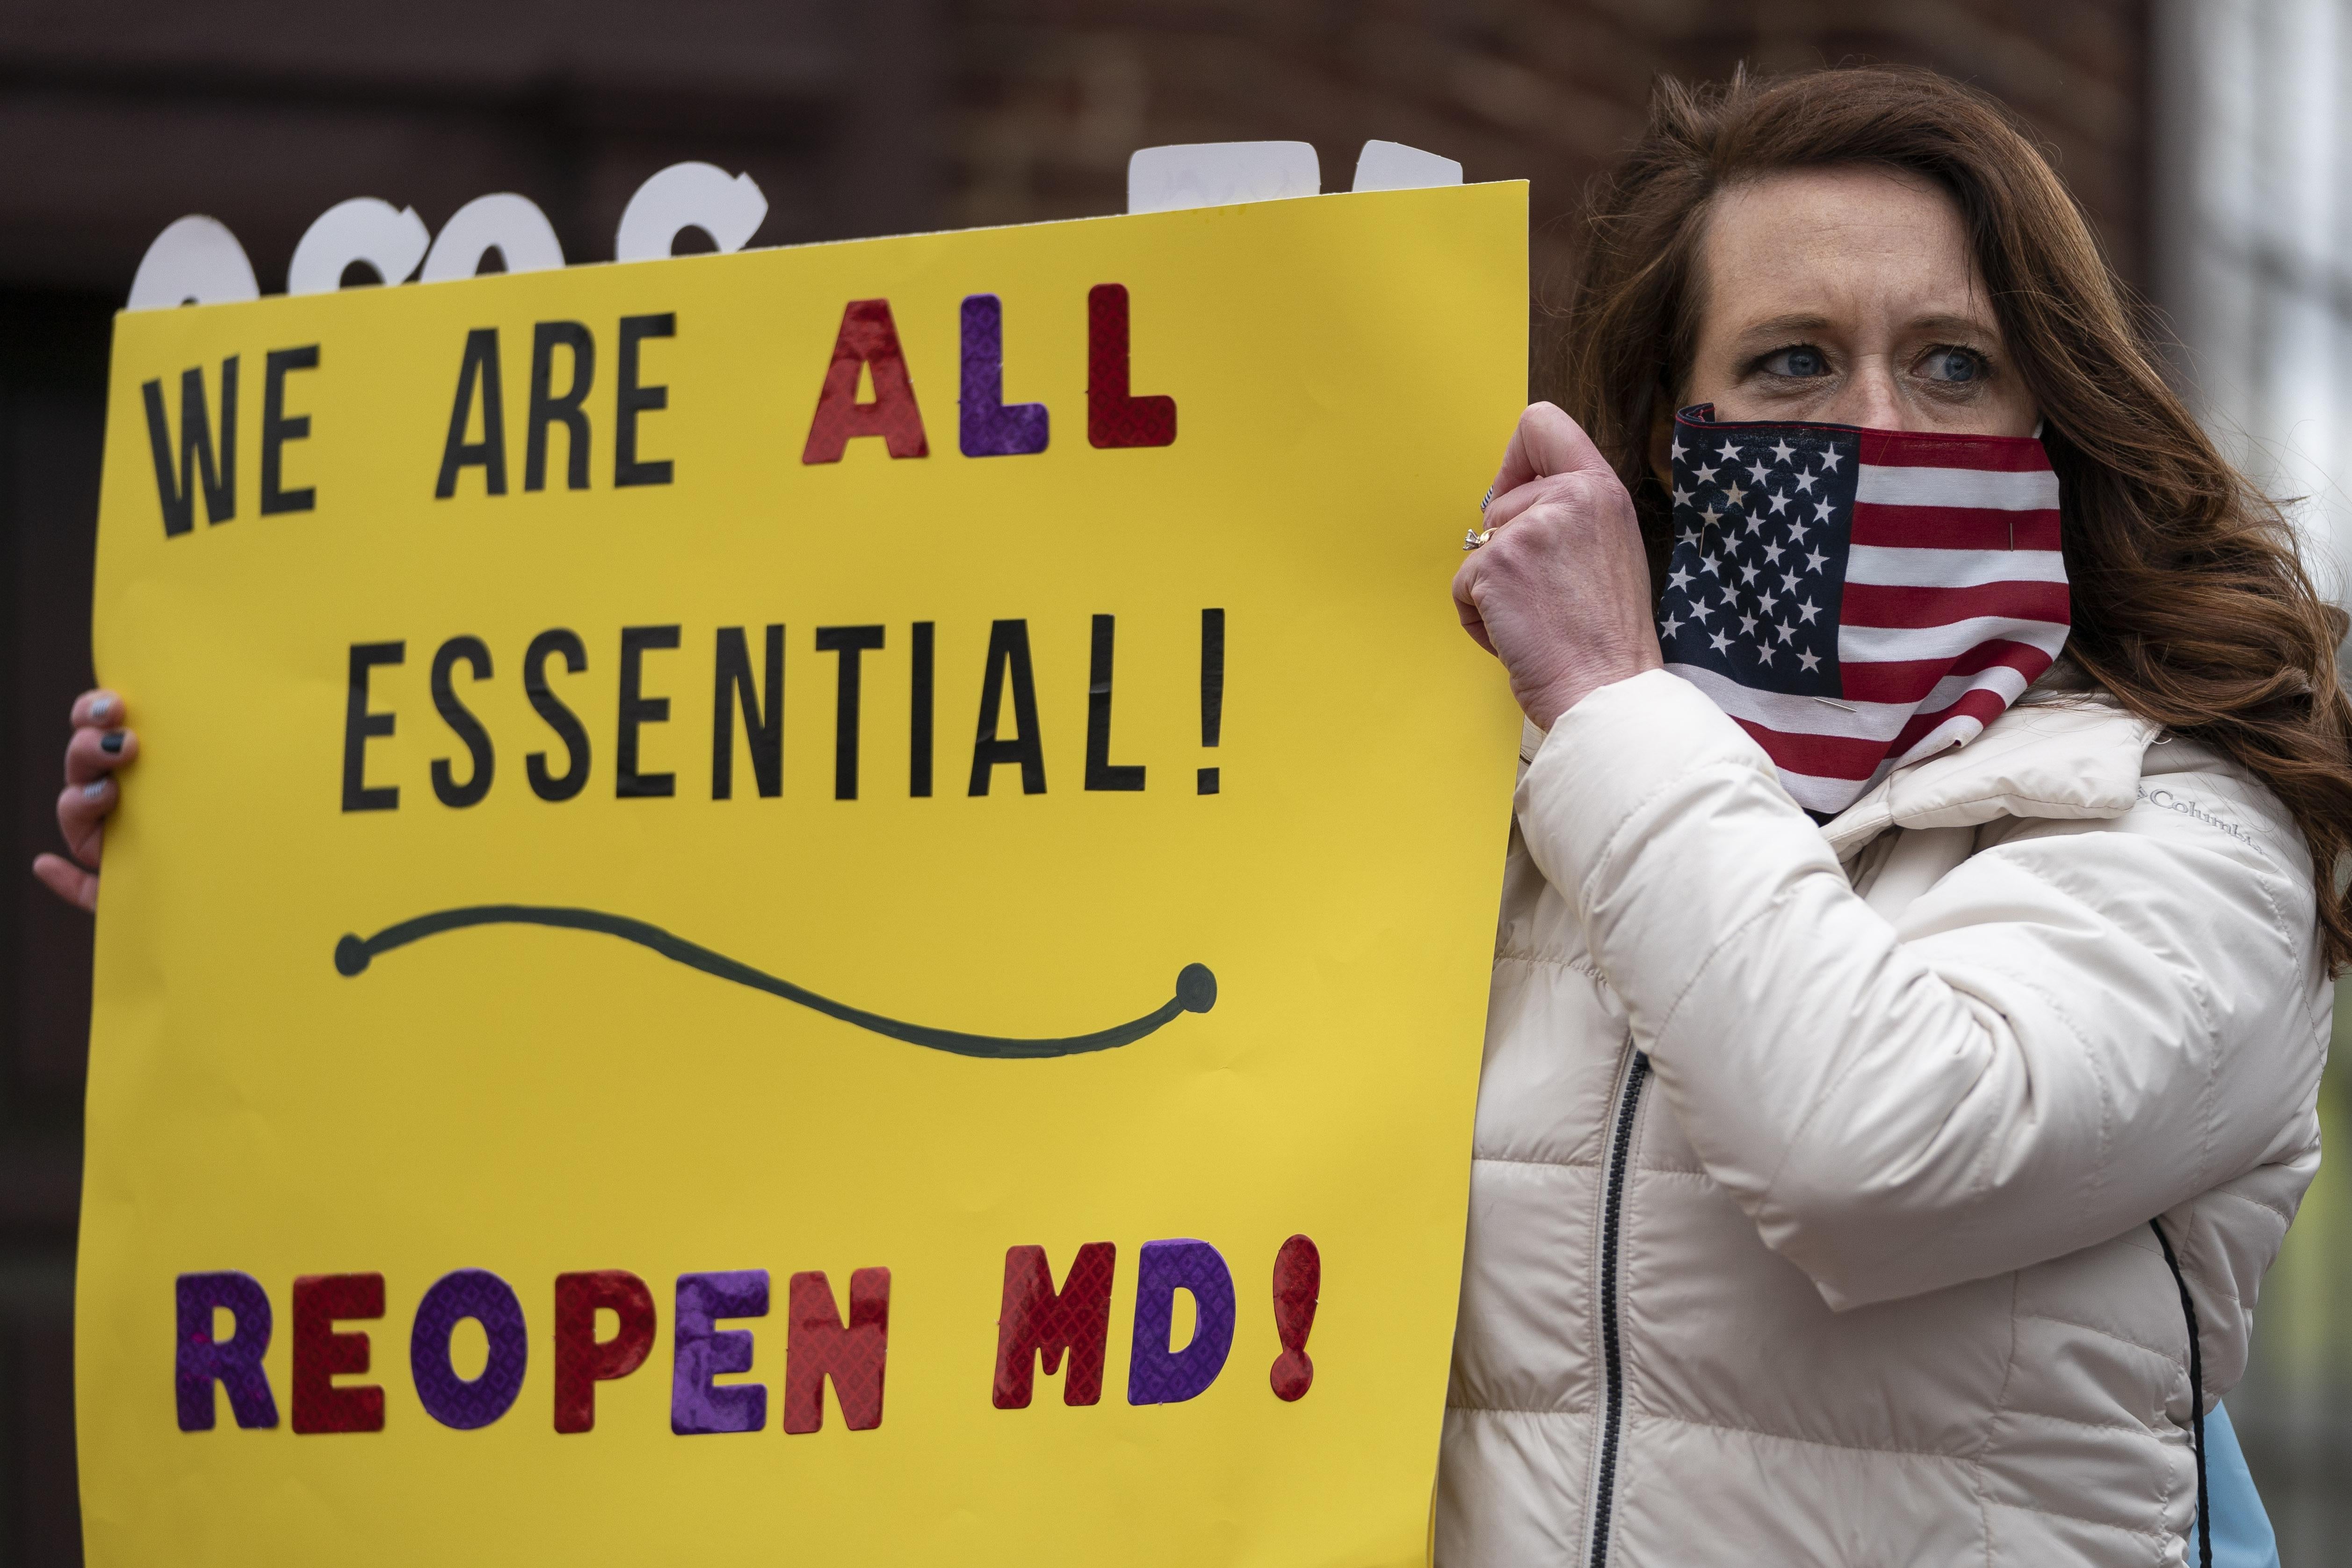 A protester wearing an American flag face covering holds up a sign that says "We are all essential! Reopen MD!"